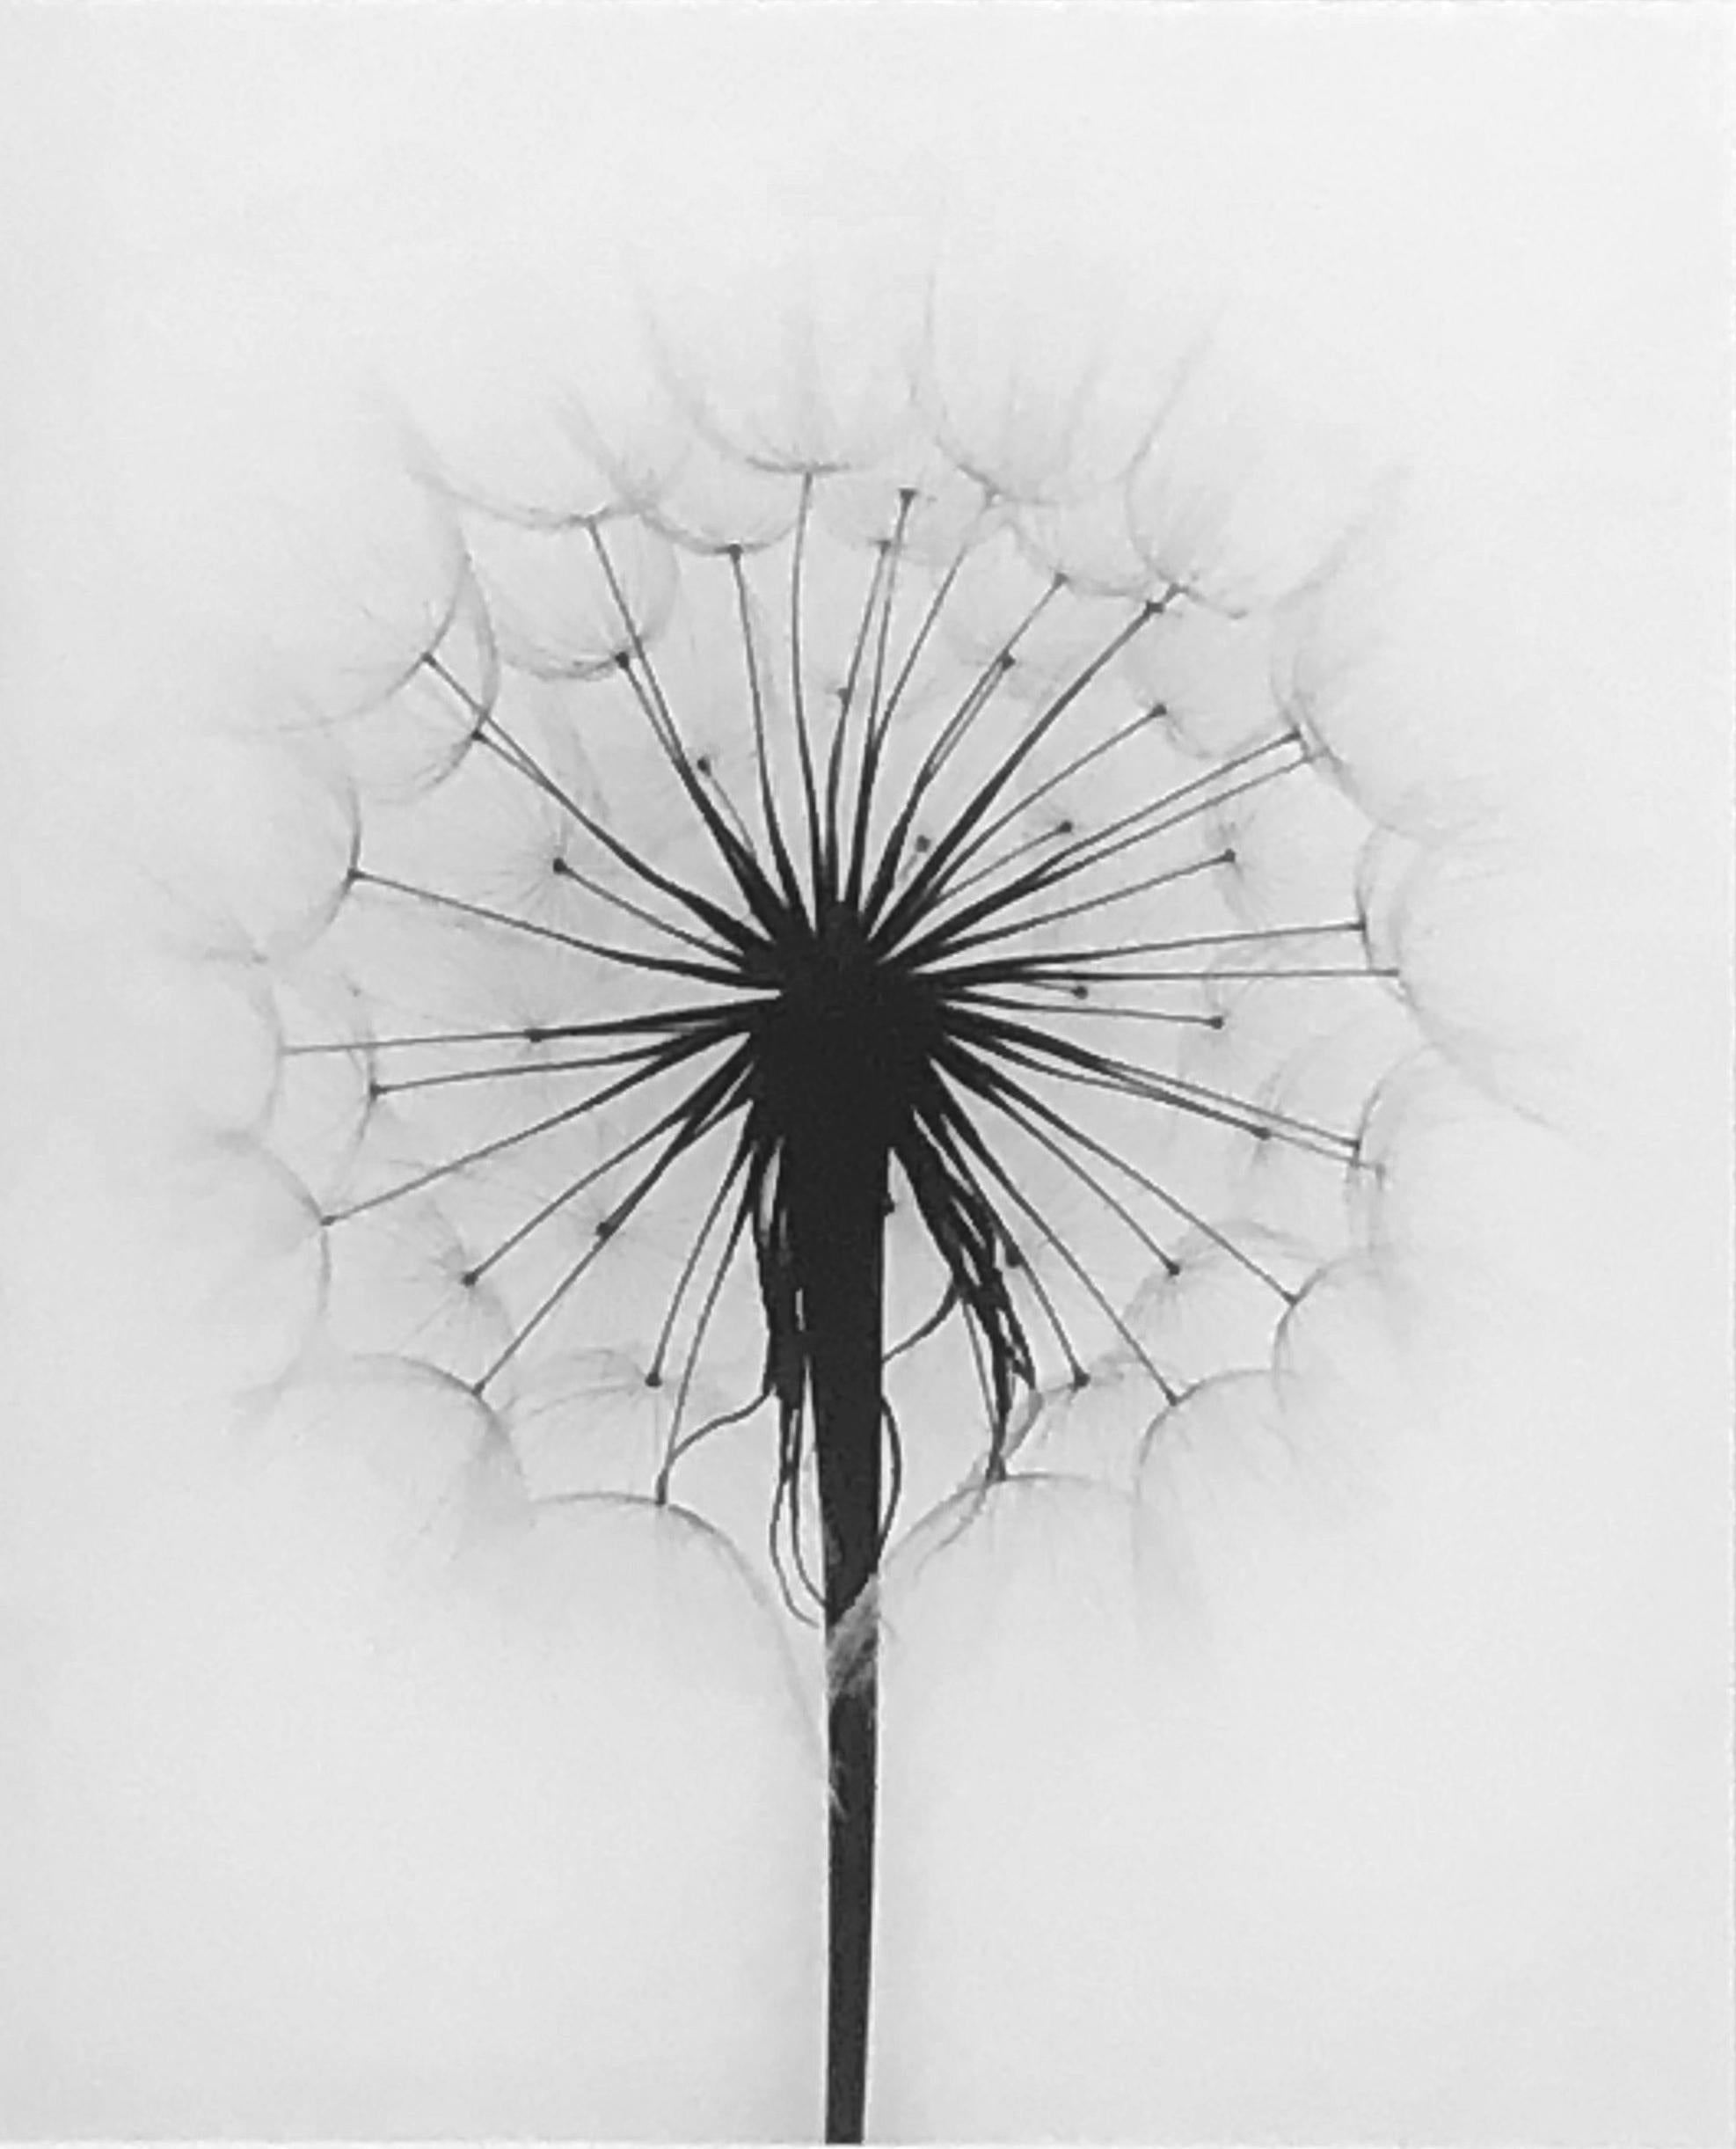 Paul Caponigro, Scots Thistle, Rochester, NY, 12.75 x 10.5", silver gelatin print. Signed, titled and dated on mount recto. Excellent condition